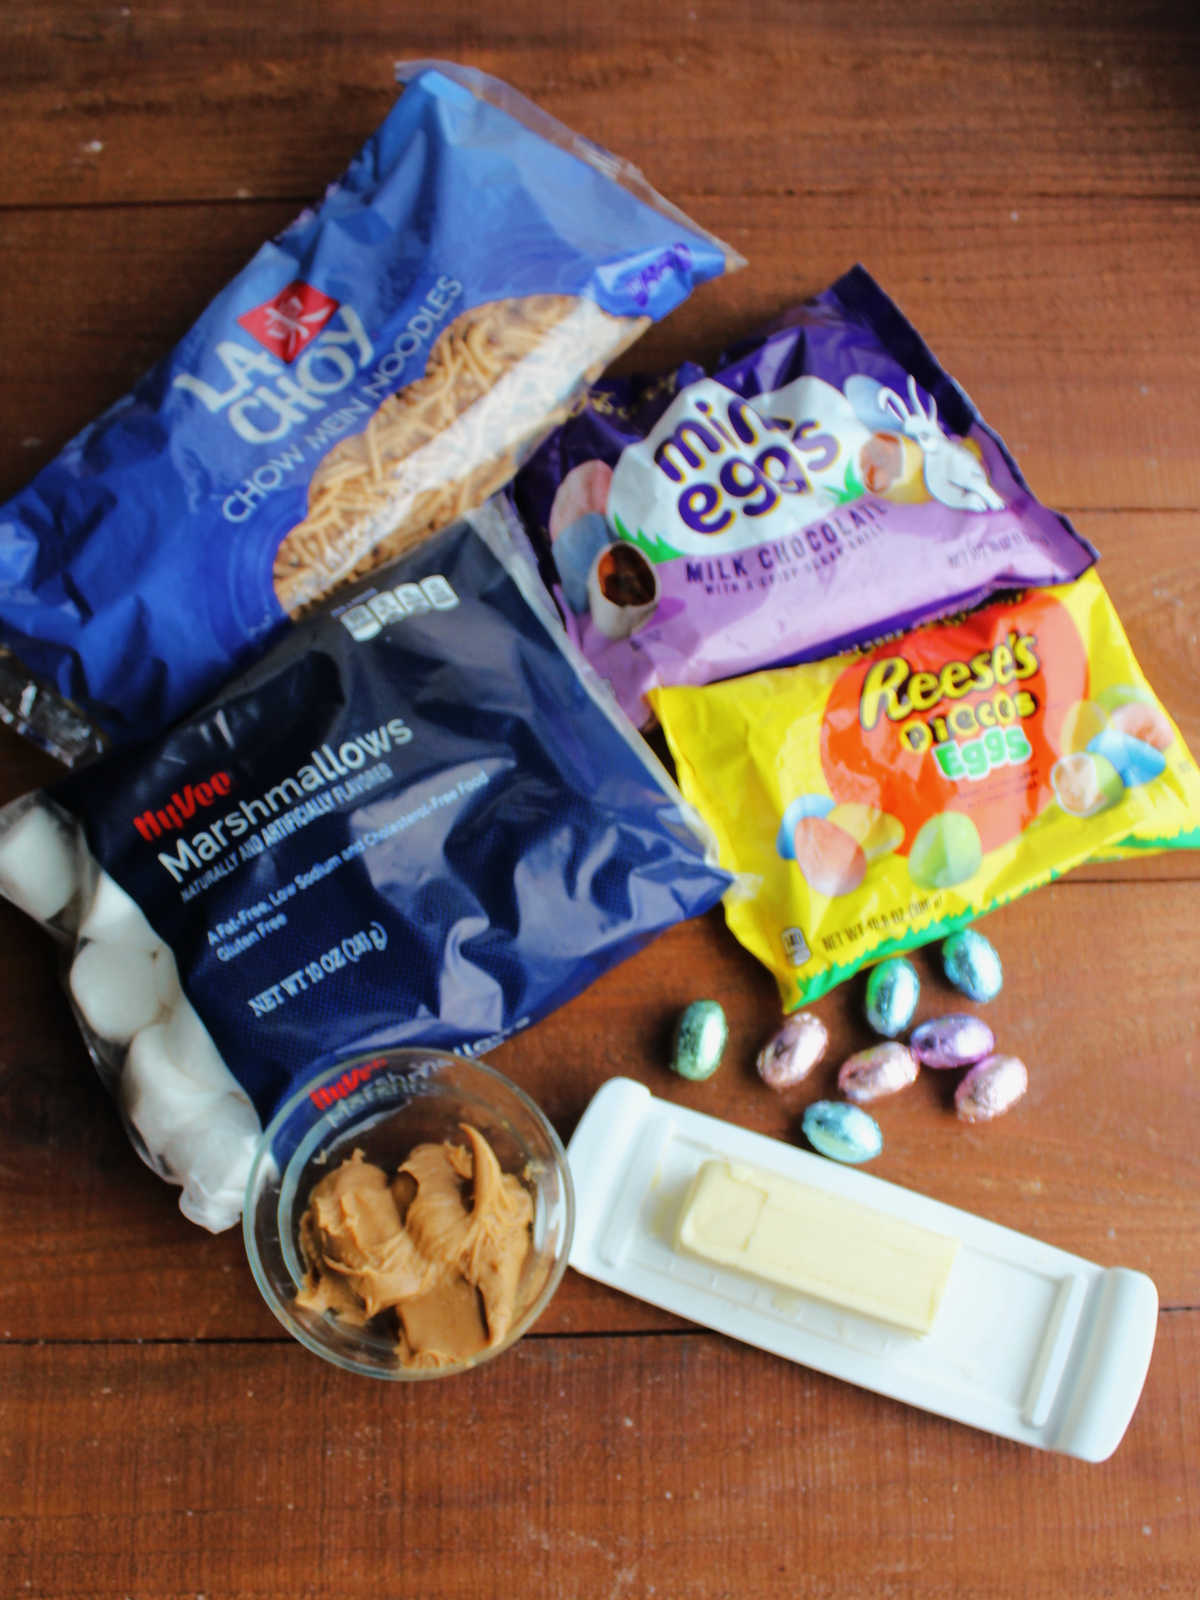 Ingredients including crunchy chow mein noodles, marshmallows, butter, peanut butter and candy eggs ready to be made into edible nests.